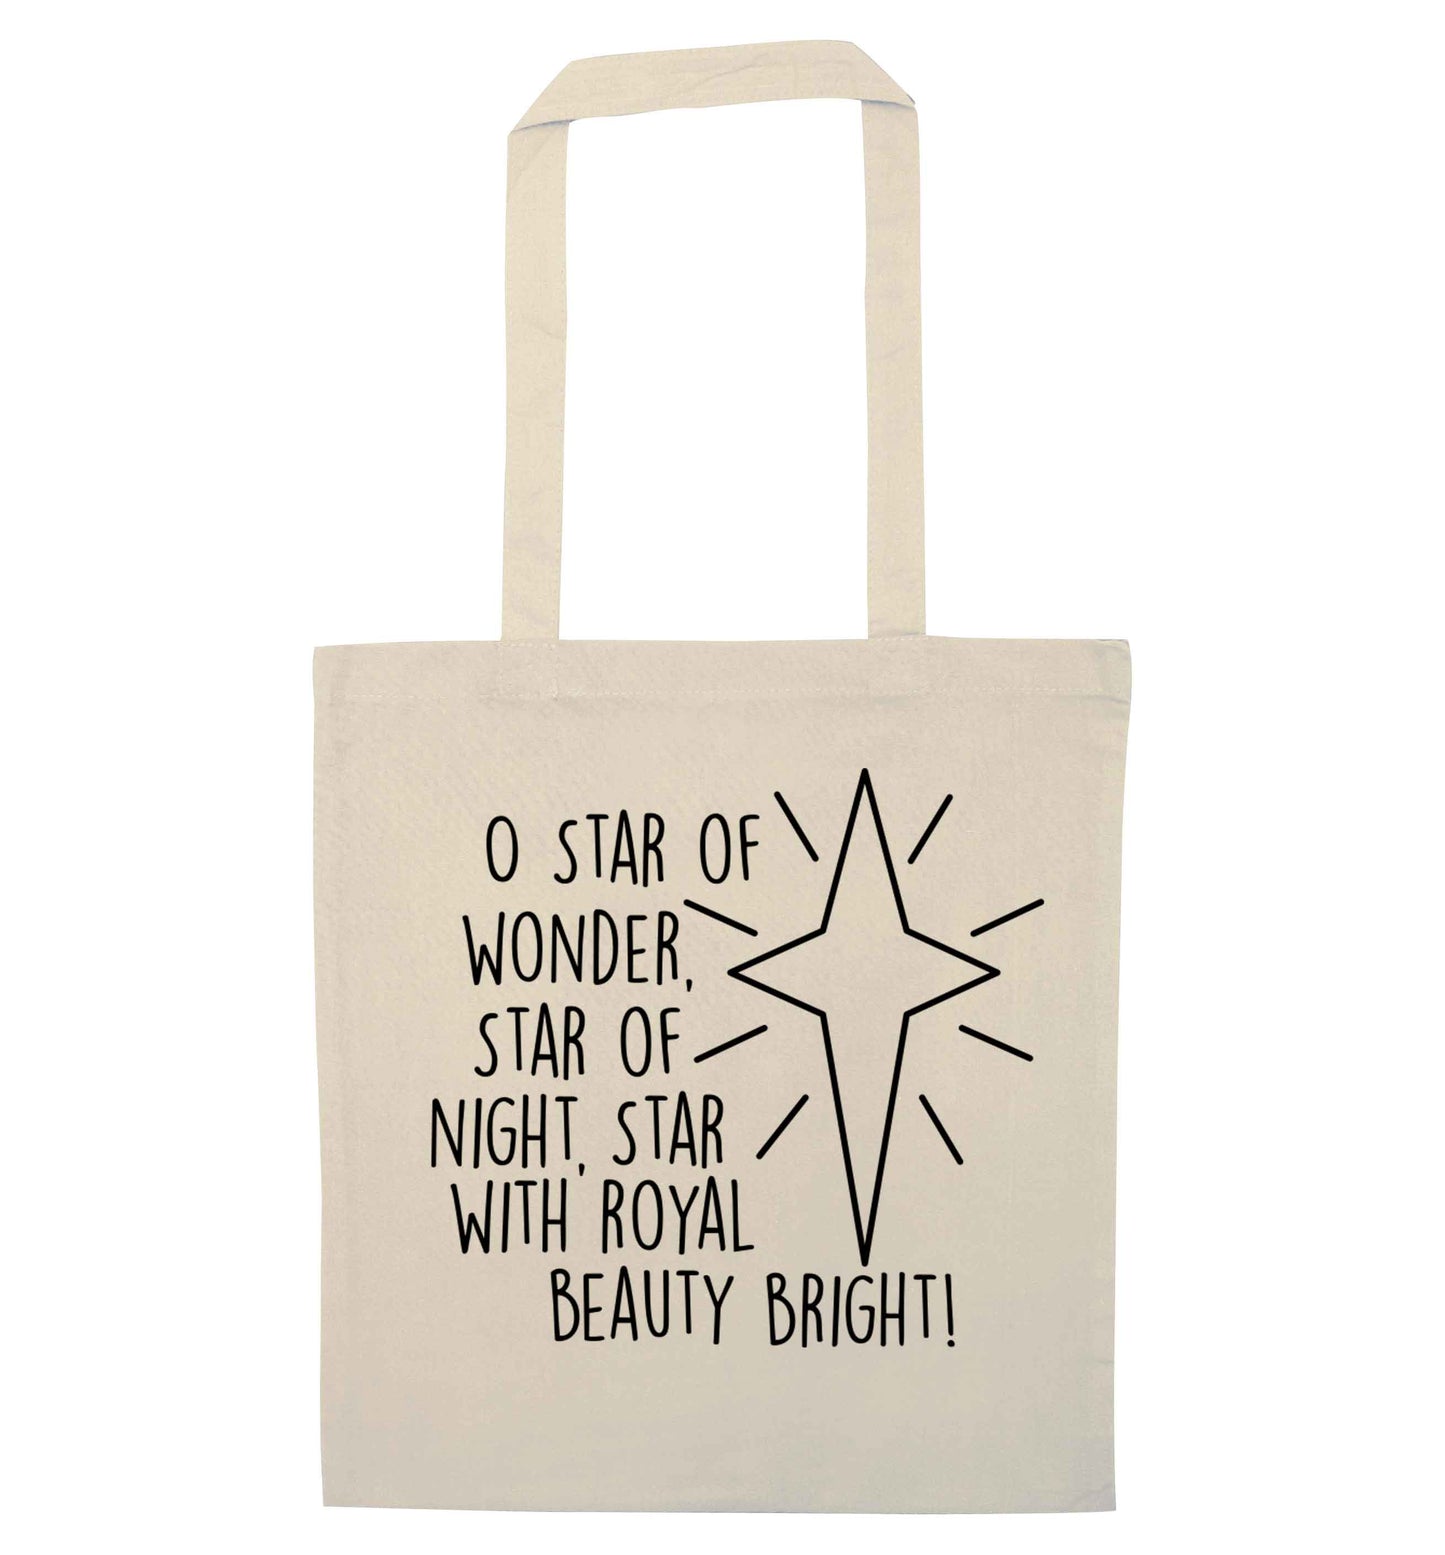 Oh star of wonder star of night, star with royal beauty bright natural tote bag